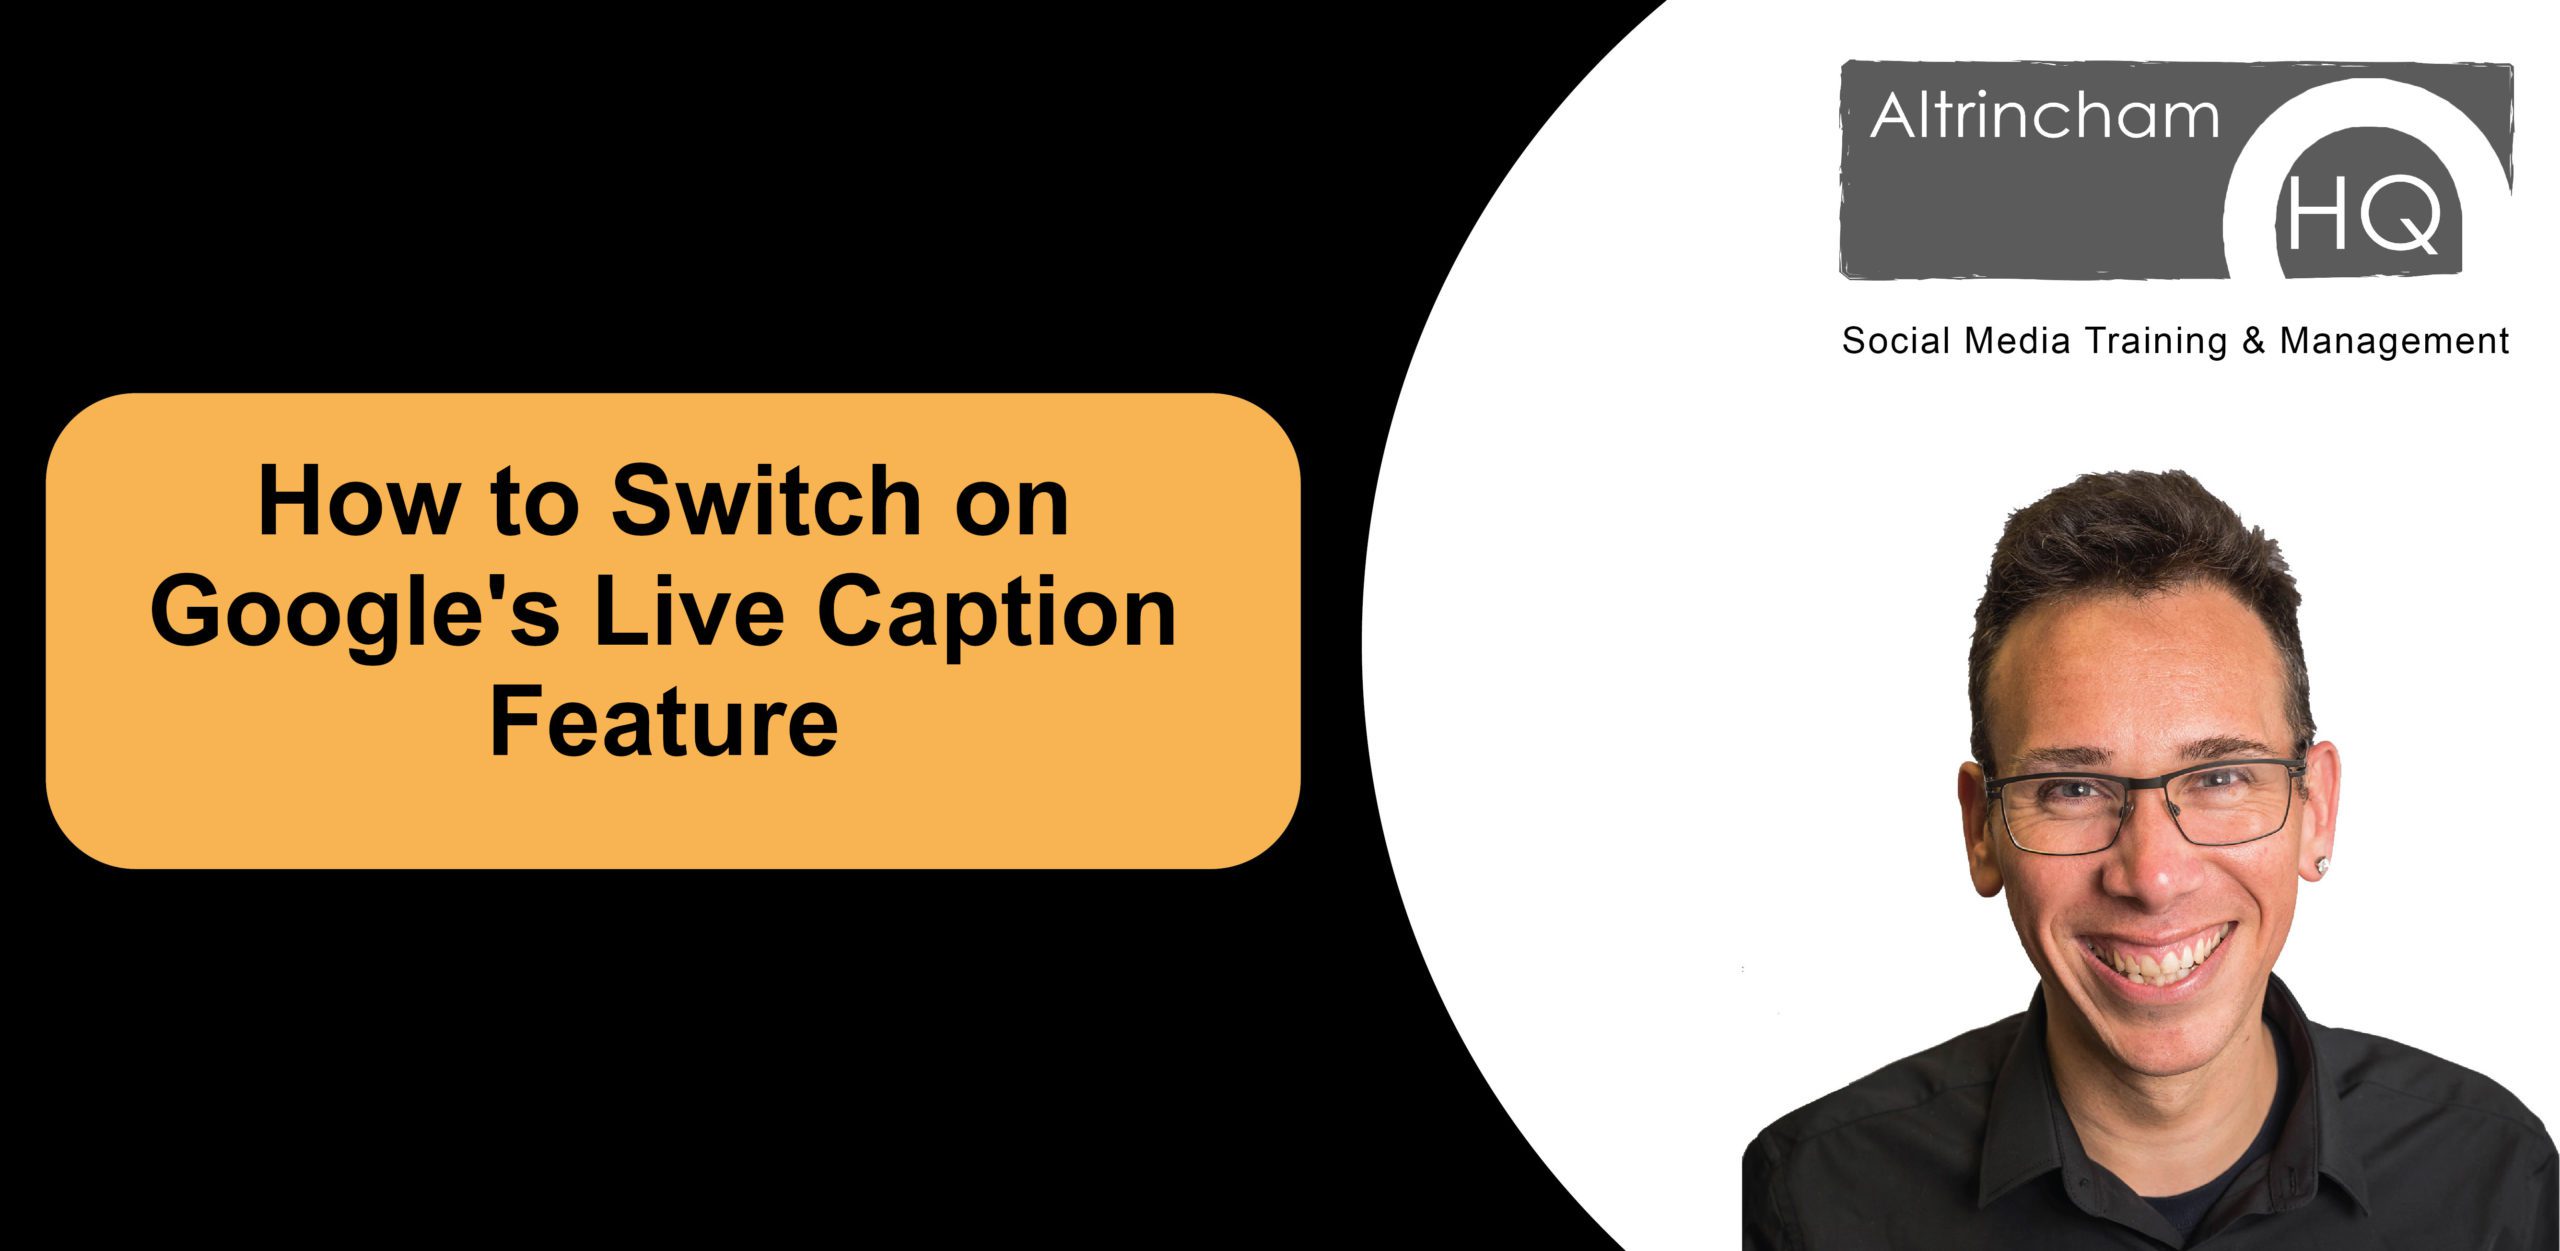 How to Switch on Google’s Live Caption Feature (Video Captions)